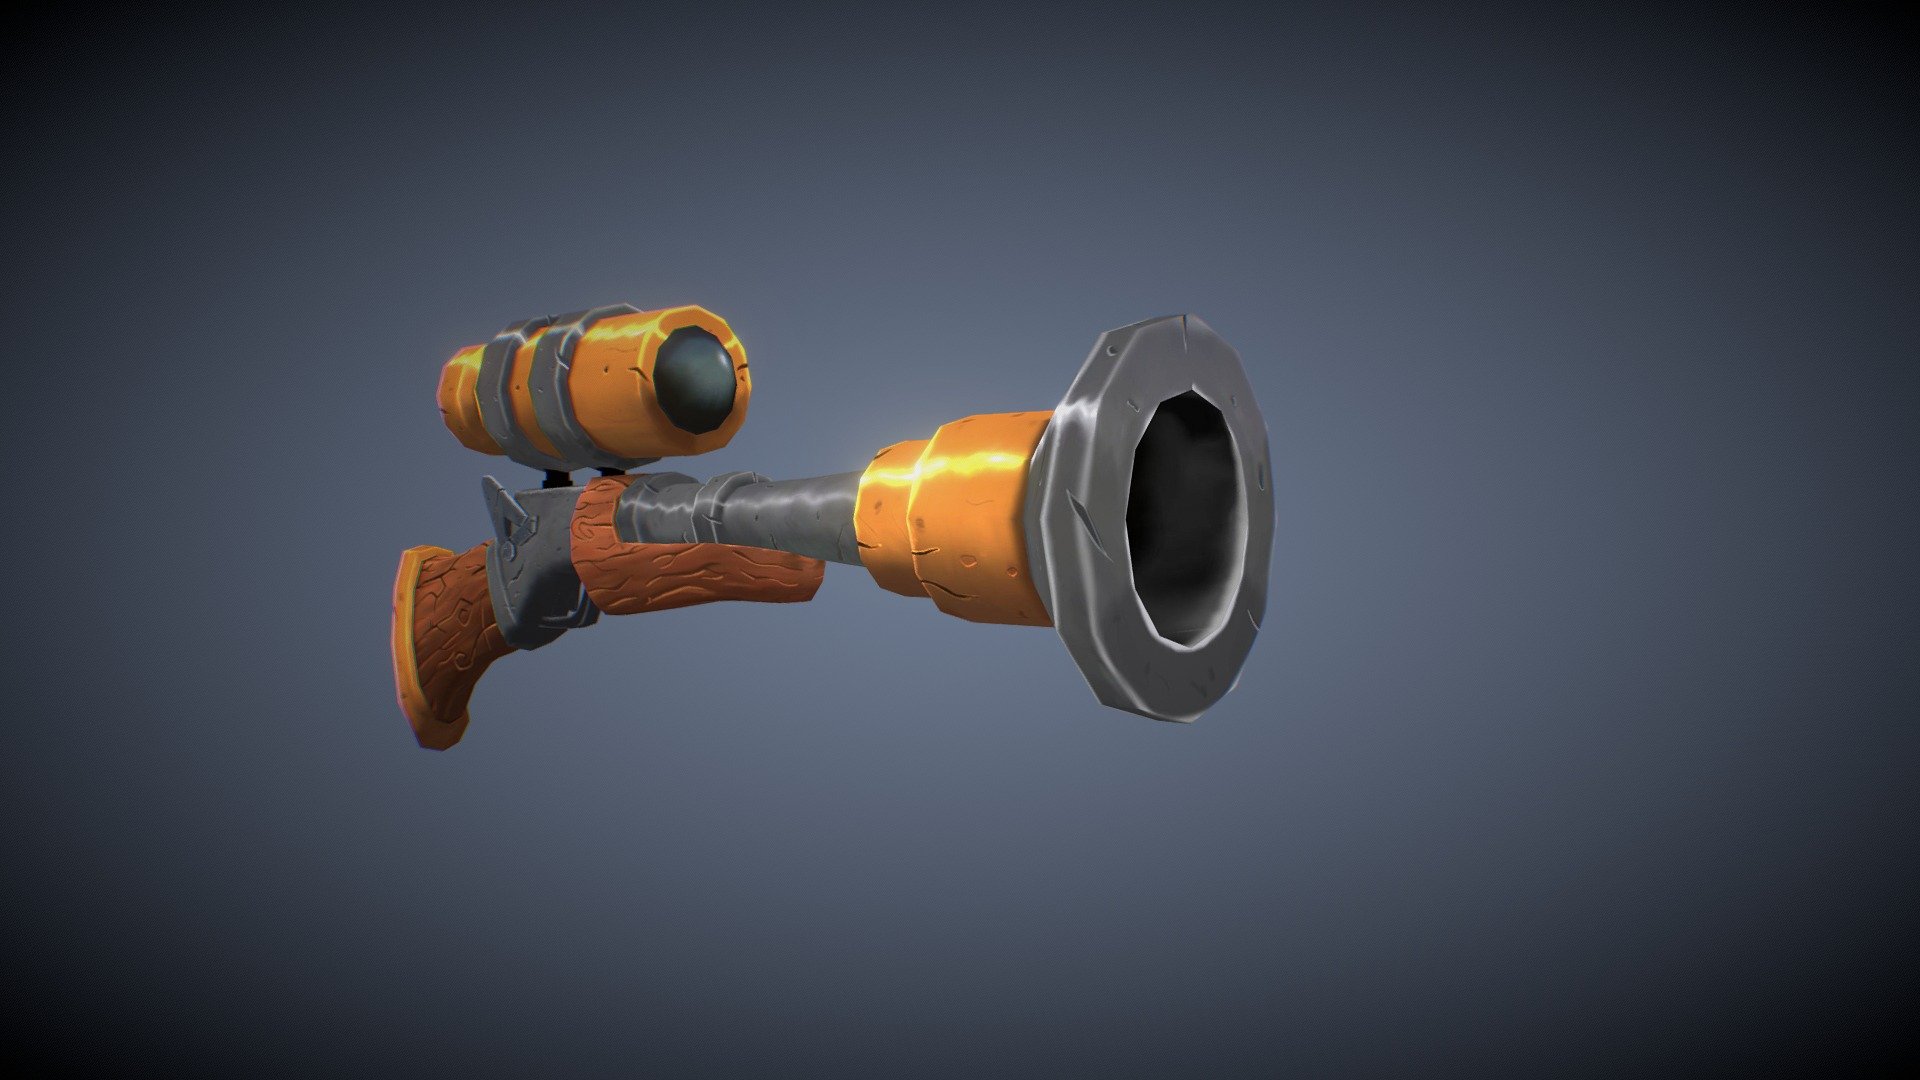 It was a big challenge to produce an asset using hand painted. This is the first time I use this technique and I found it as incredible as it is complex. It was an arduous path as I don't use much 2D in my projects but it's definitely something I want to improve! - Cartoon Gun - 3D model by Kaue Braga (@kauebraga) 3d model